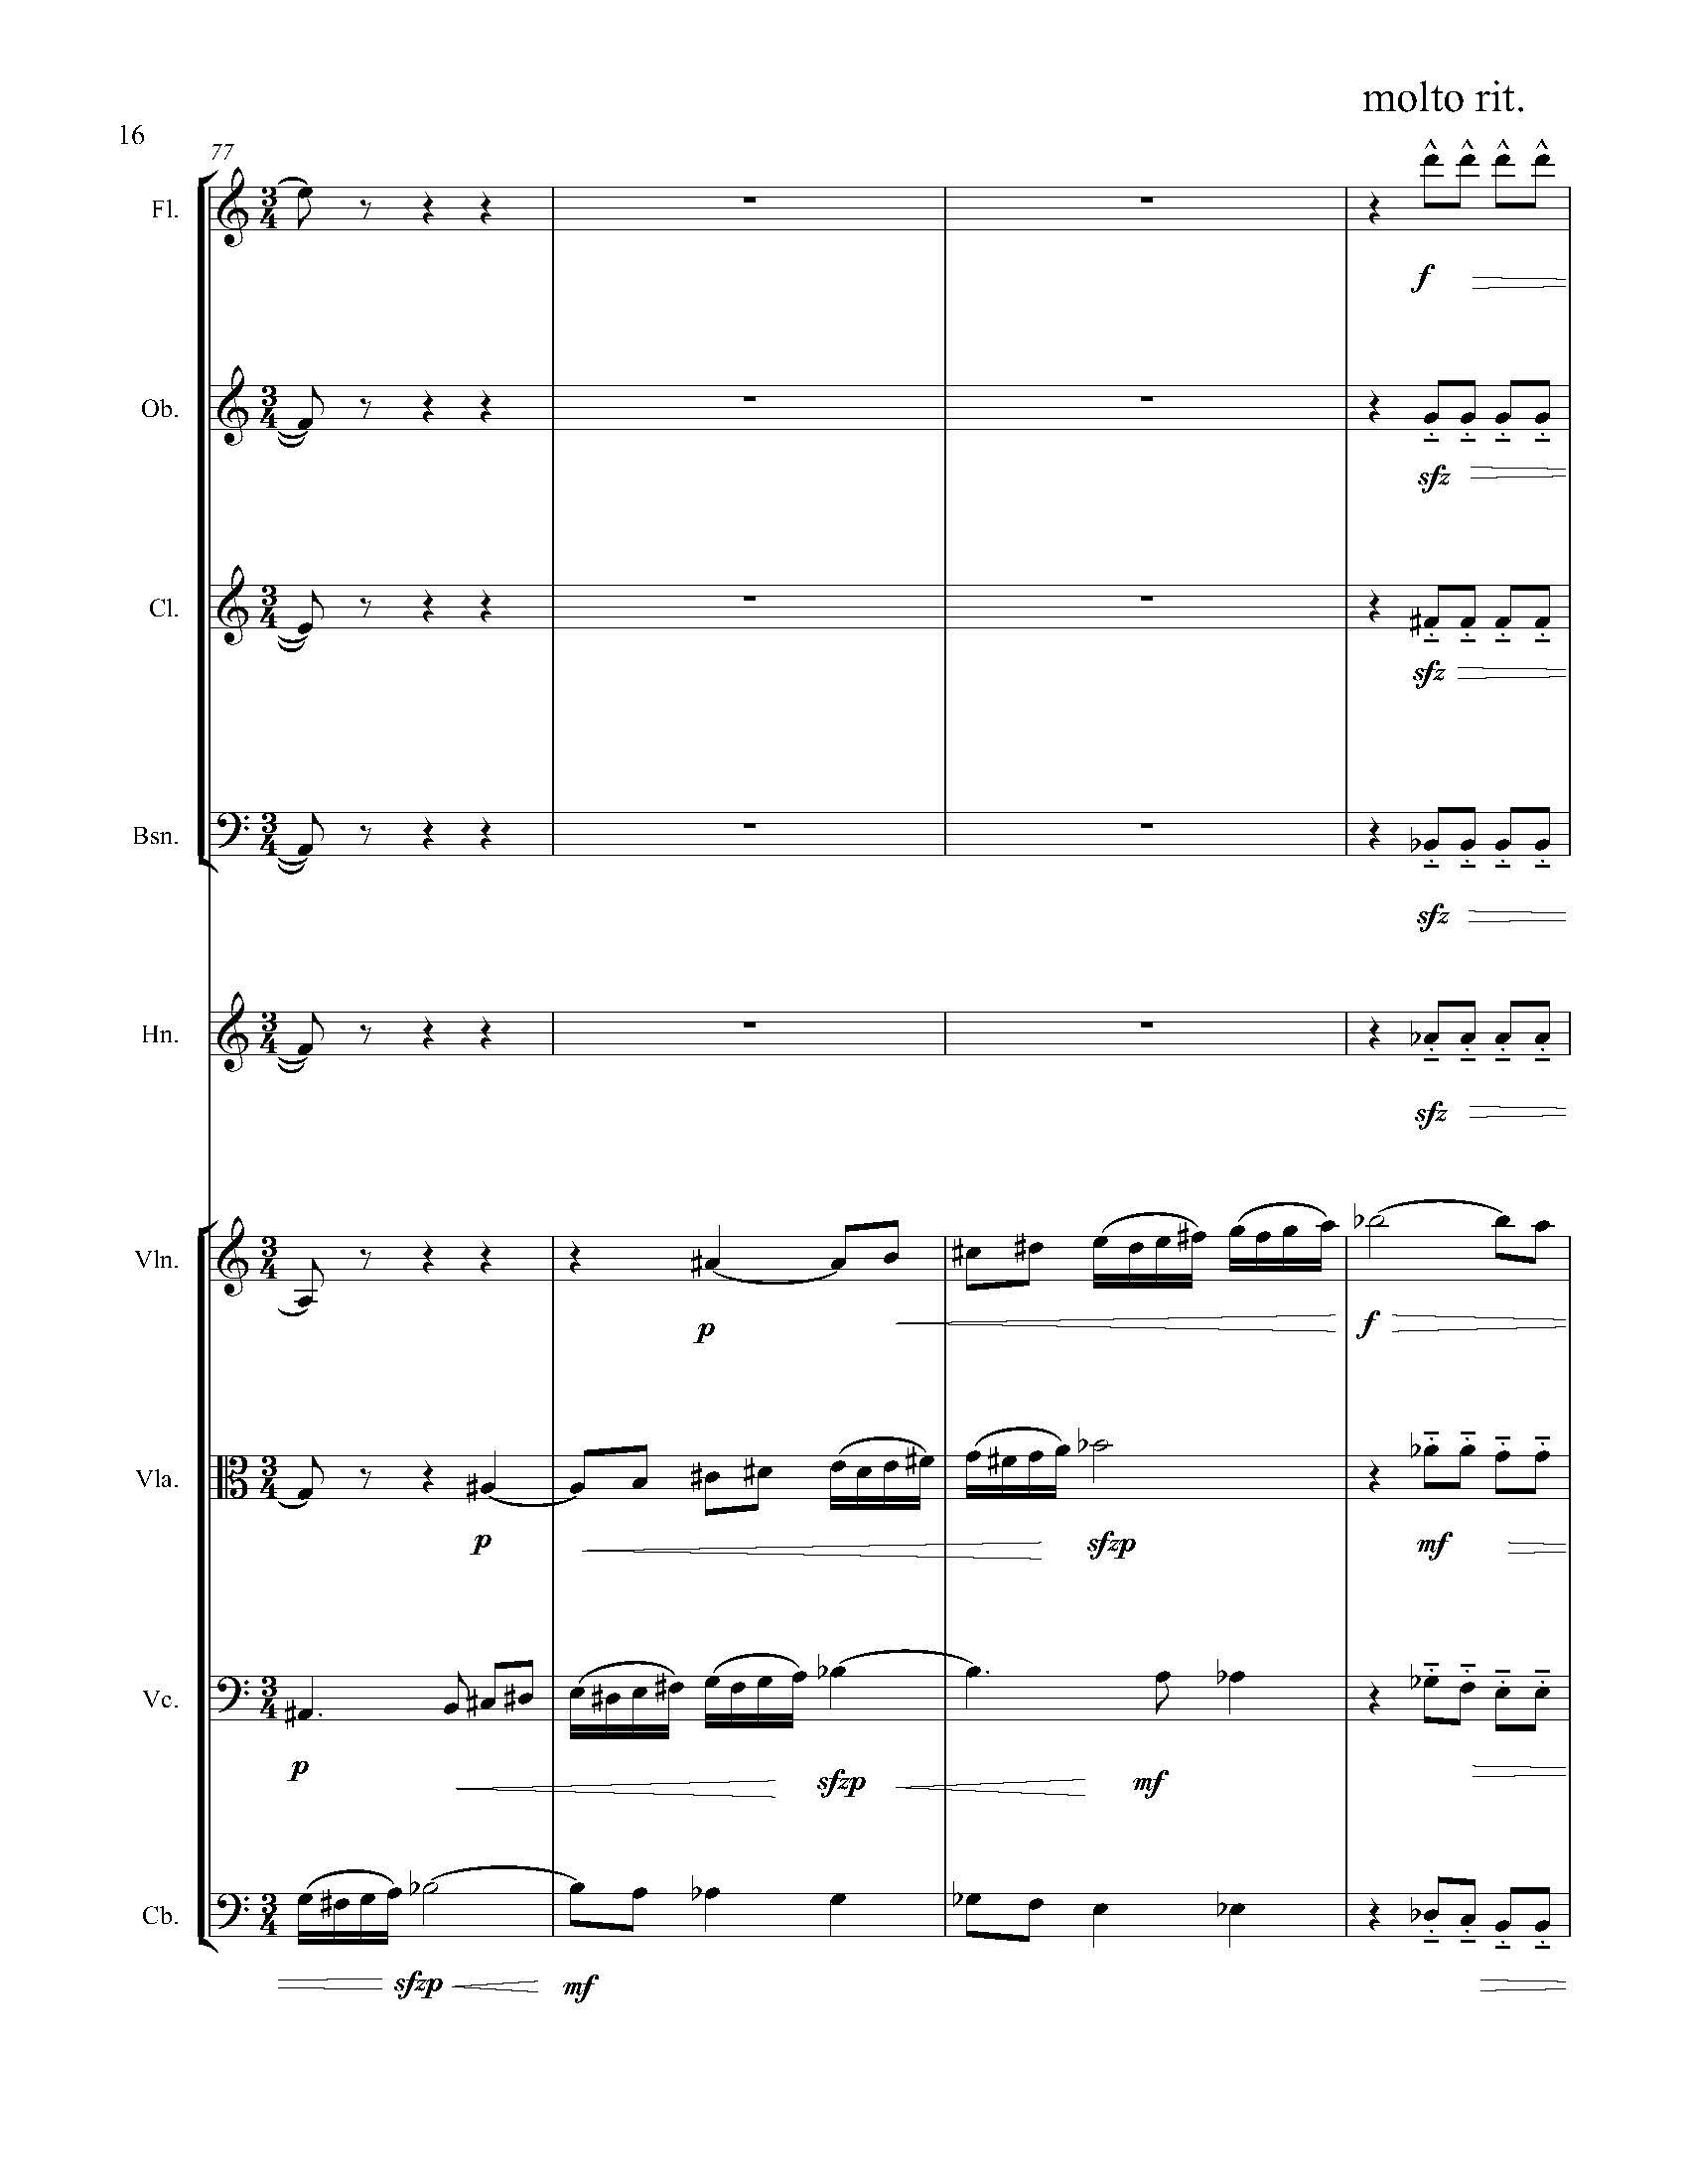 In Search of a Bird - Complete Score_Page_22.jpg